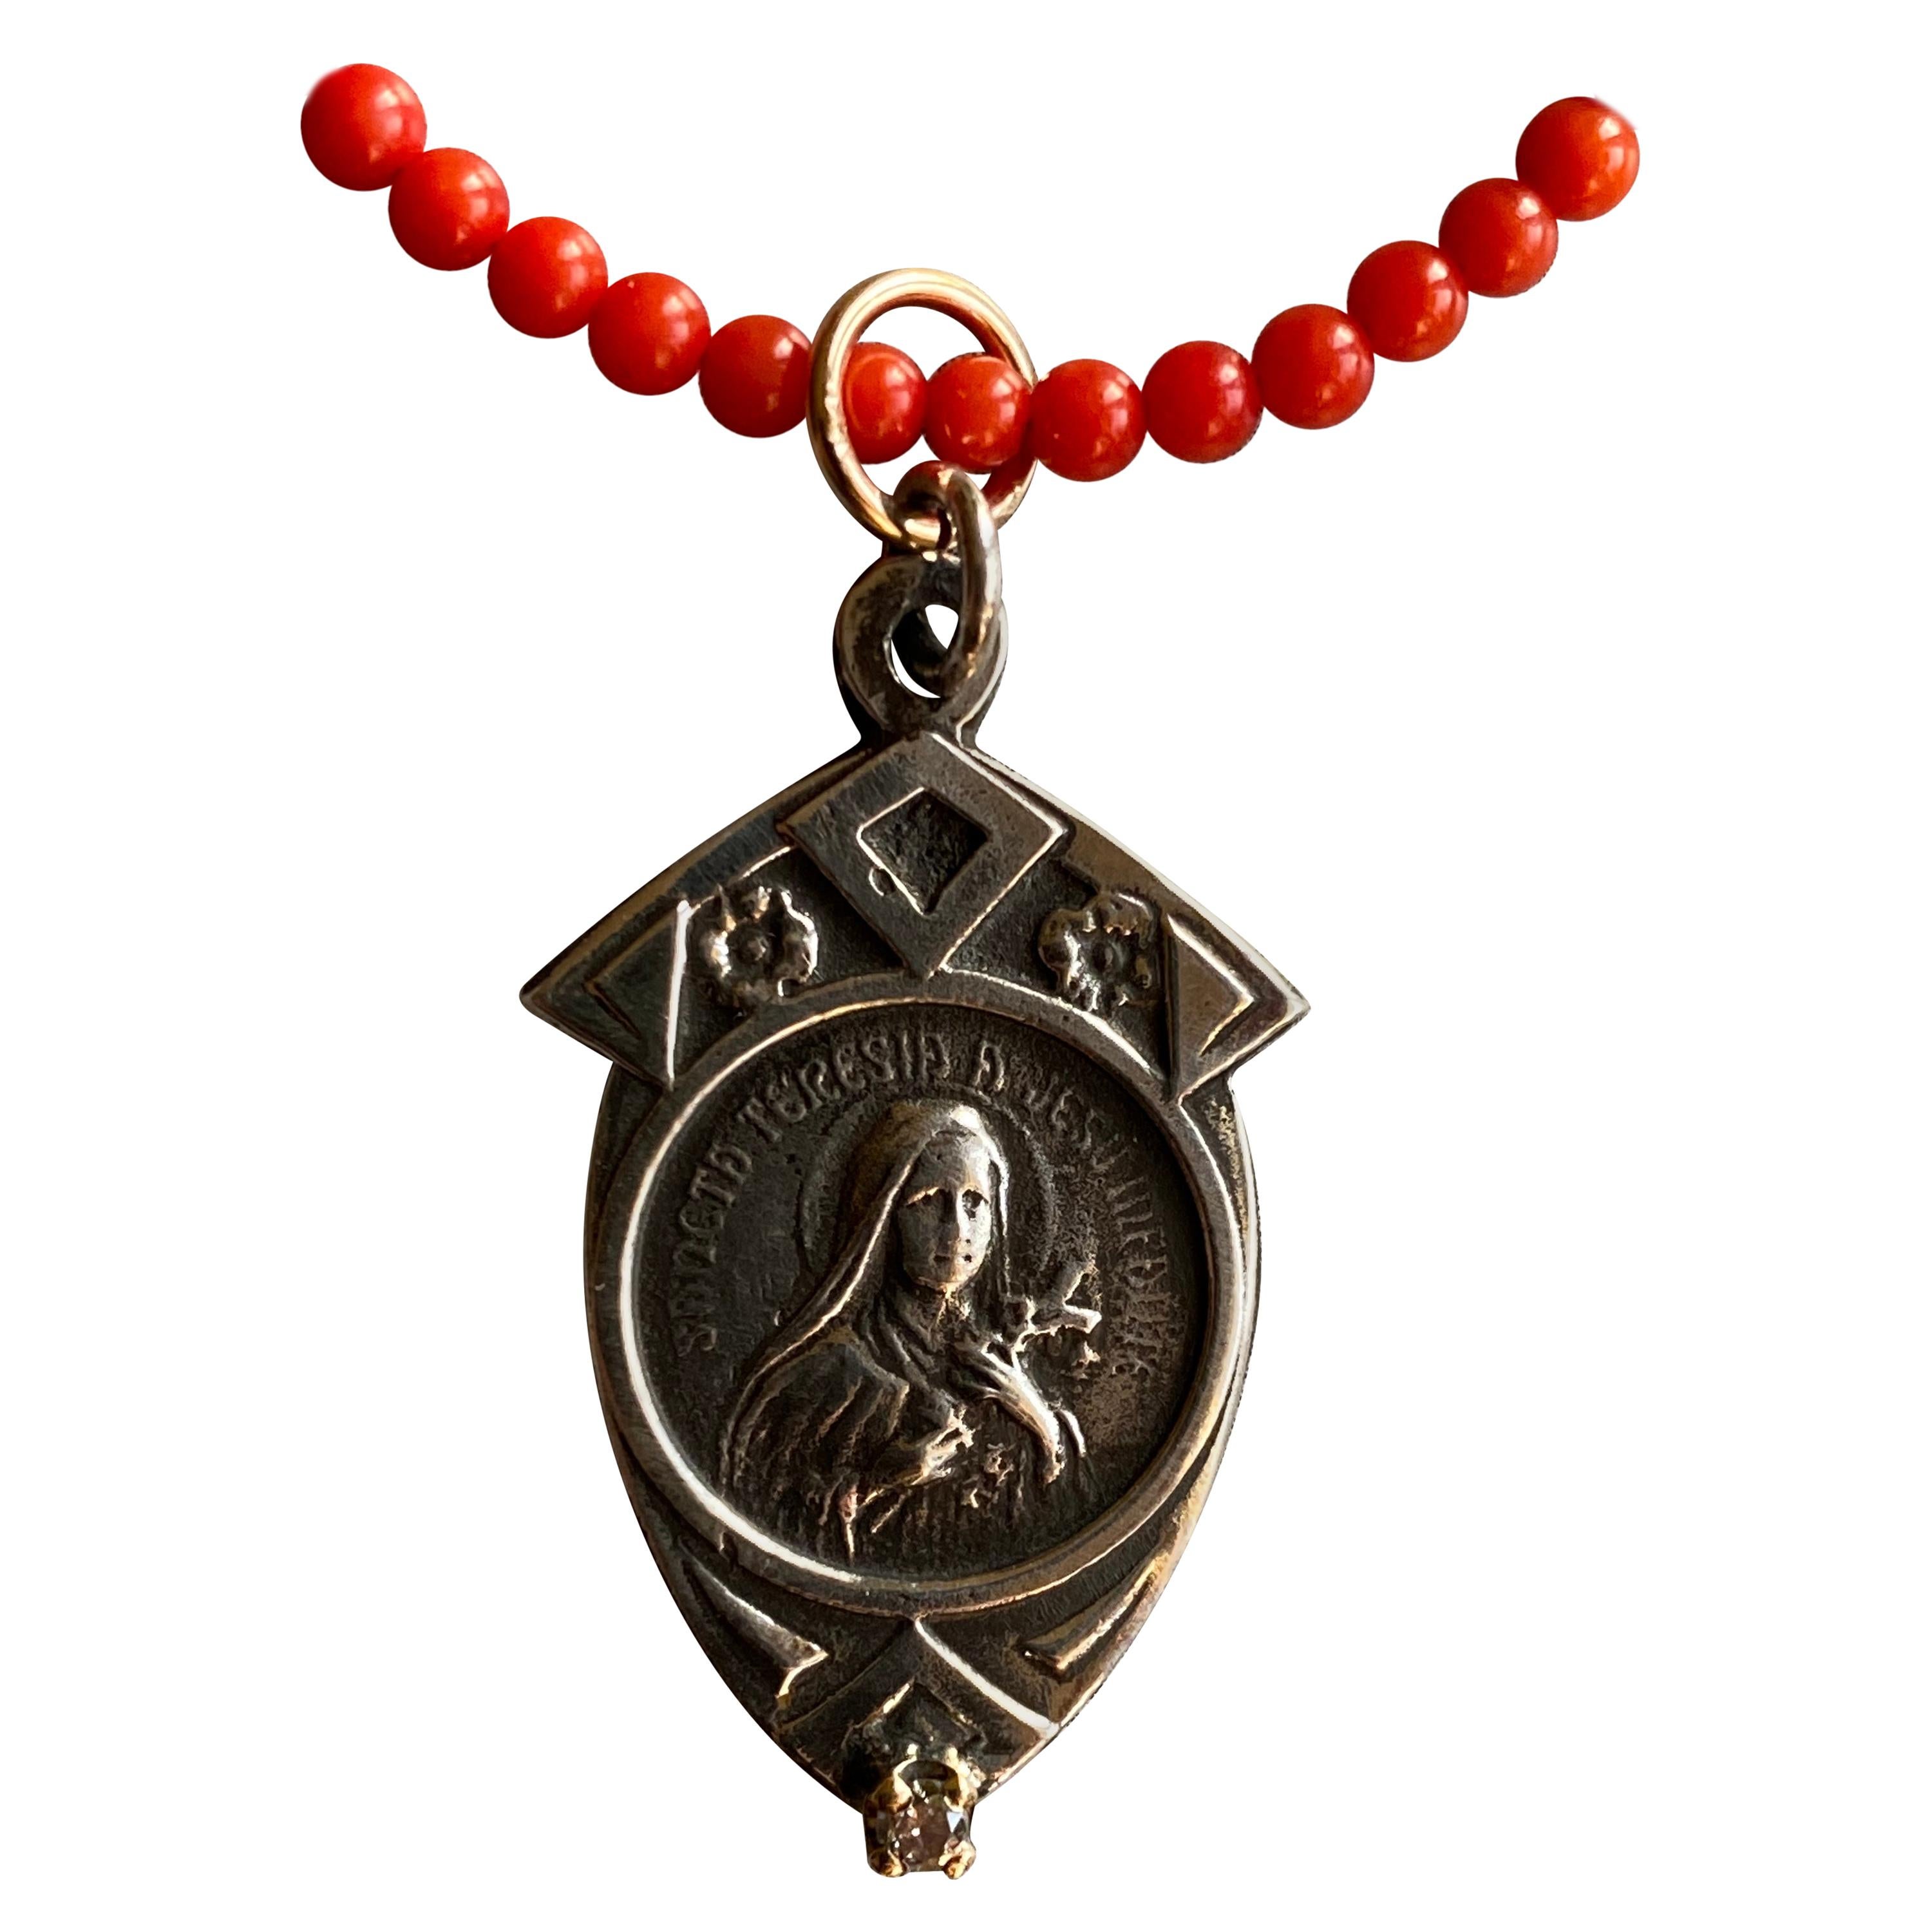 White Diamond Virgin Mary Medal silver Red Coral Bead Choker Necklace J Dauphin For Sale